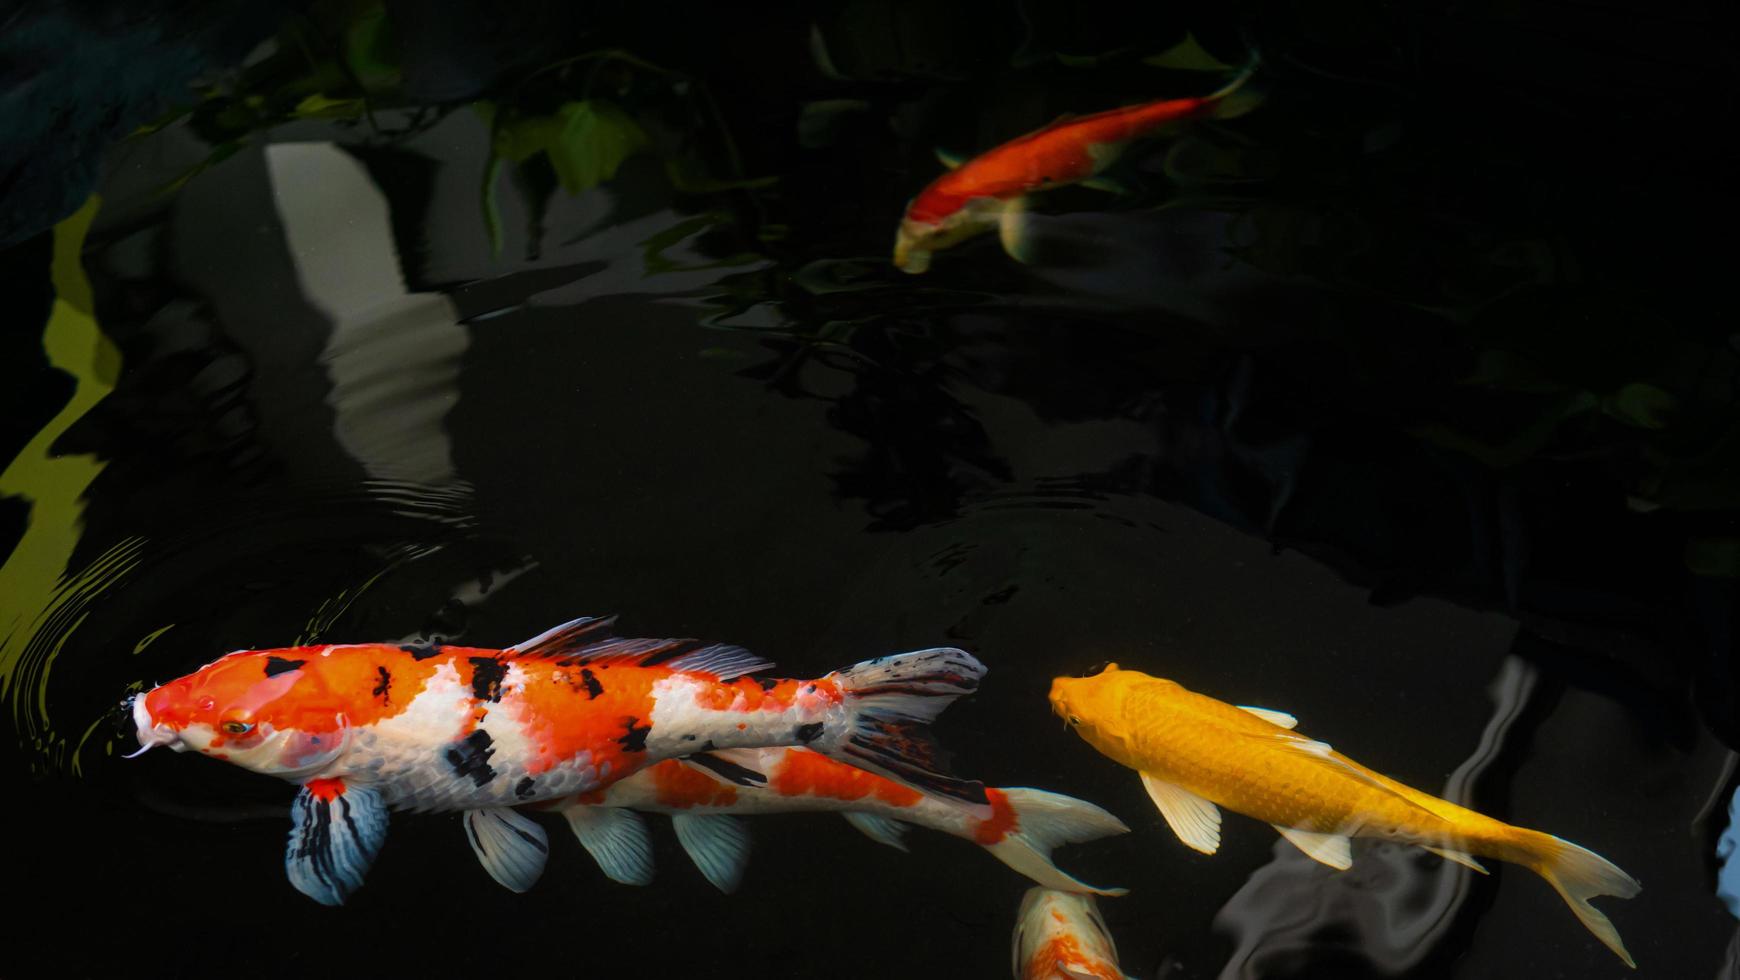 Fancy Koi fish or Fancy Carp swimming in a black pond fish pond. Popular pets for relaxation and feng shui meaning. photo